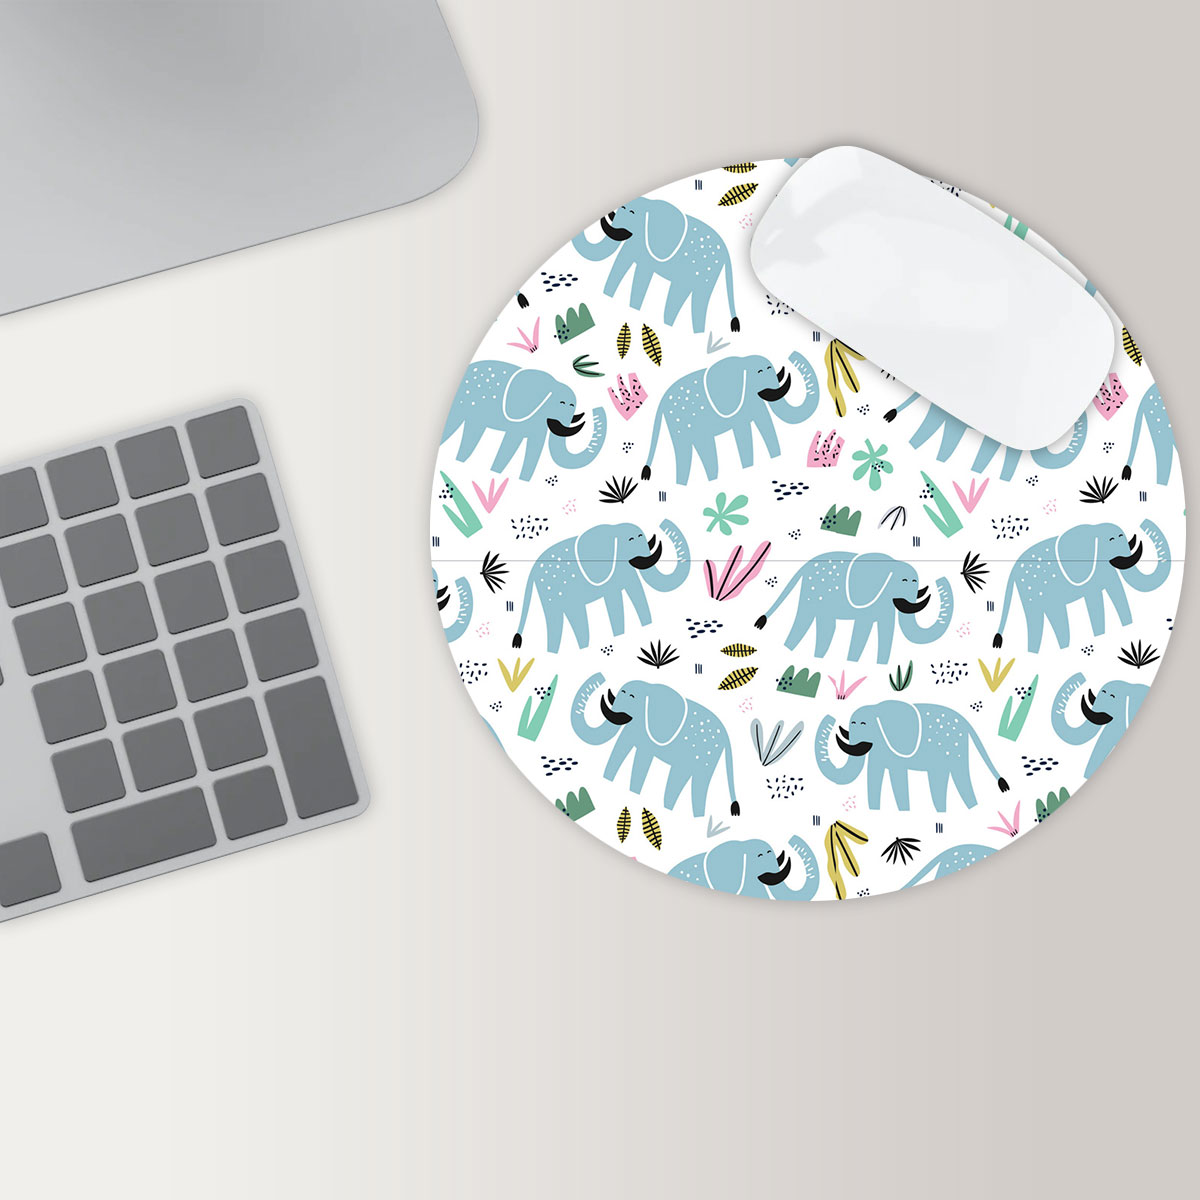 Rainforest African Elephant Round Mouse Pad 6